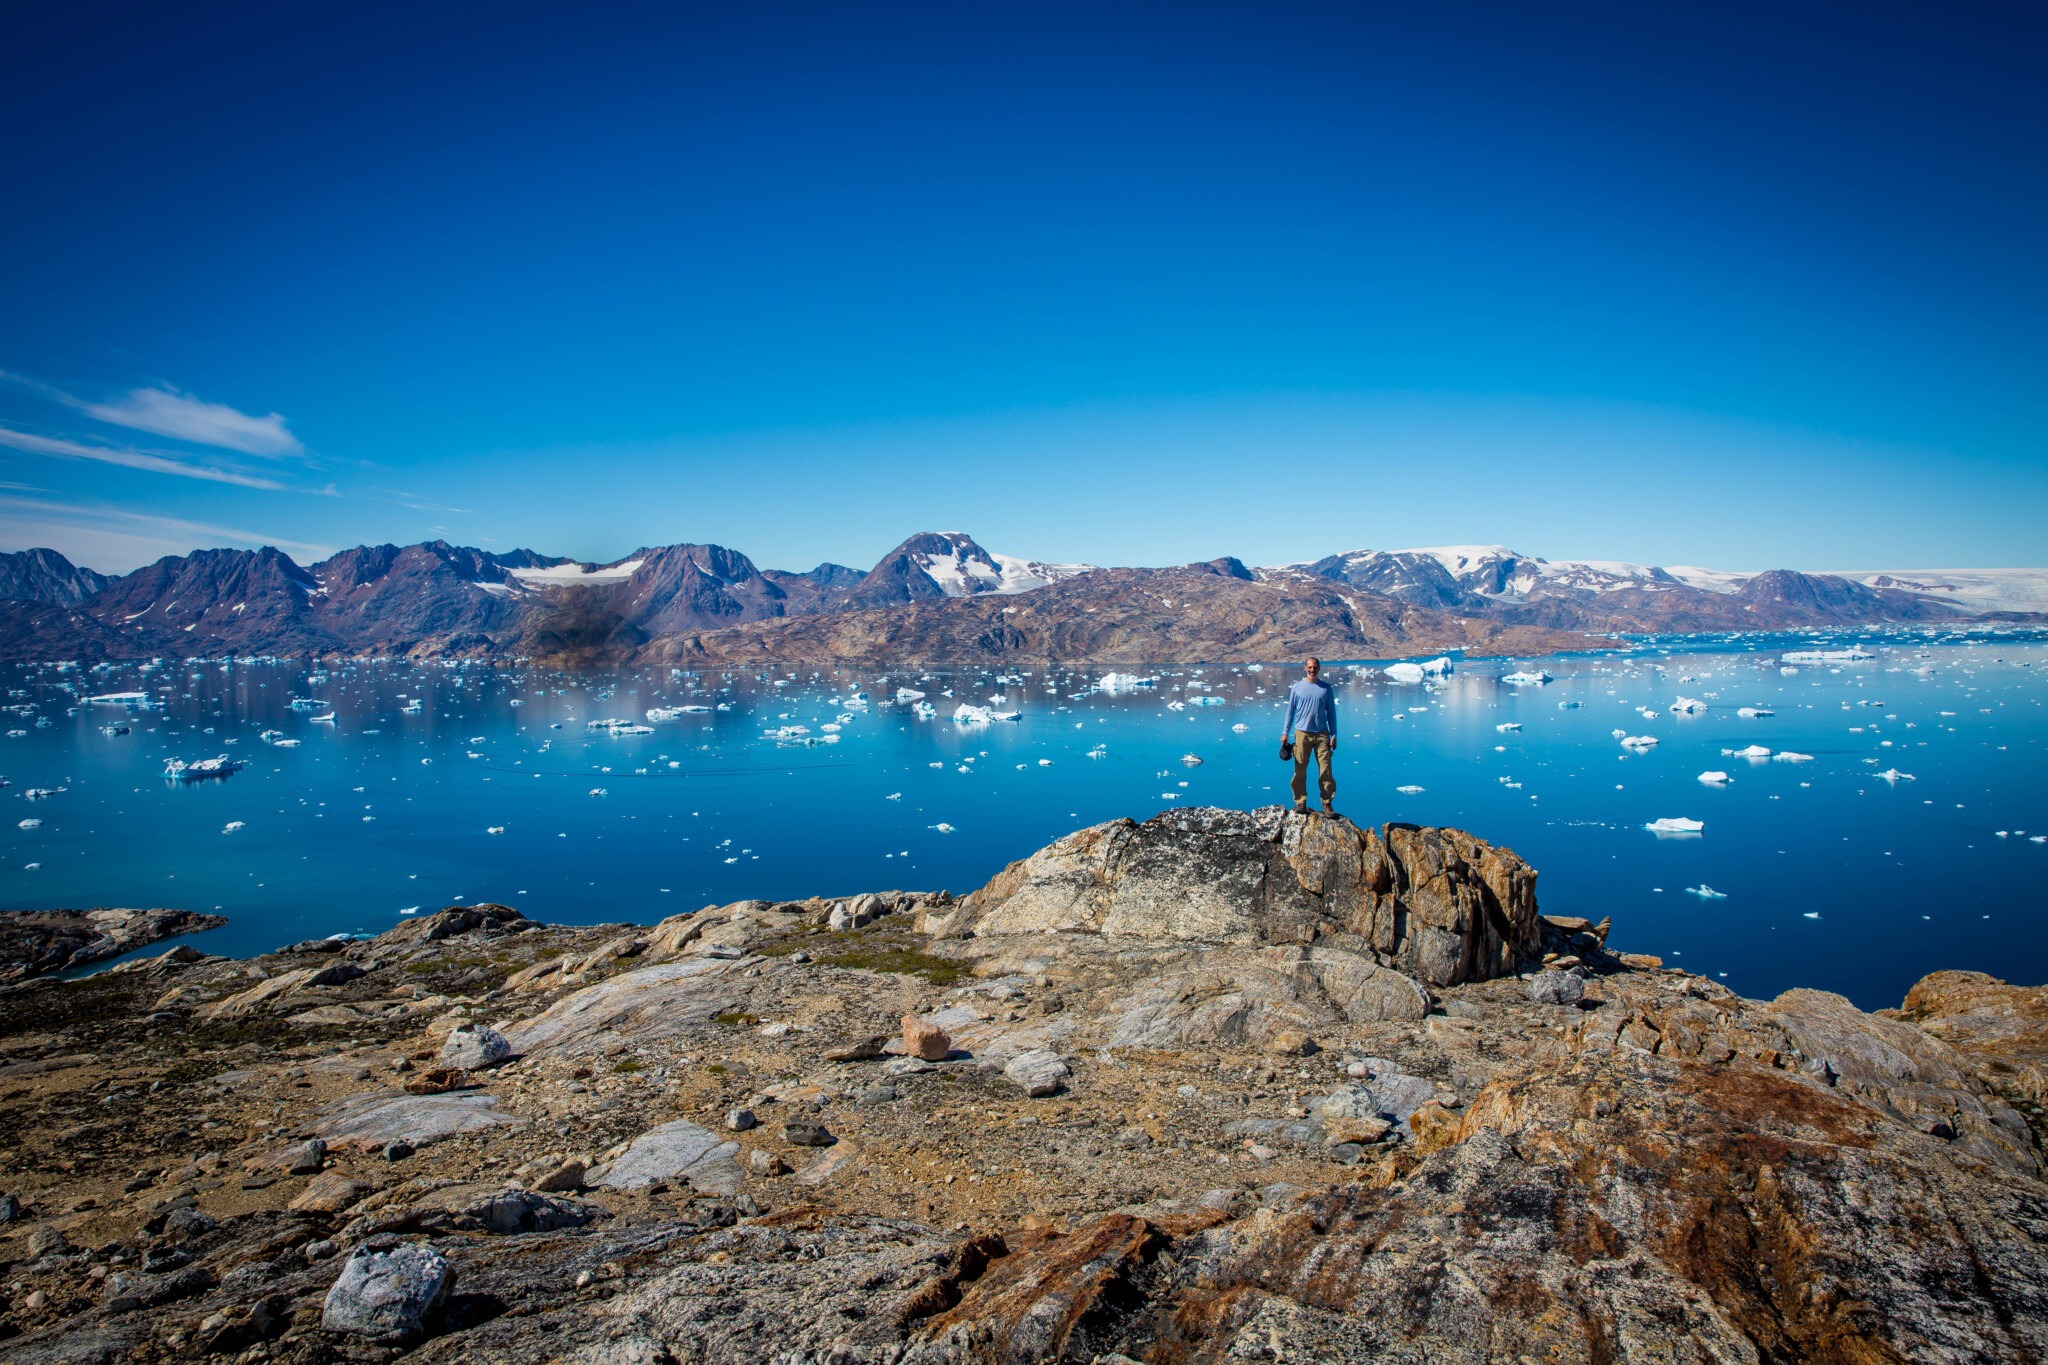 East Greenland and the mighty fjords around Sermilik